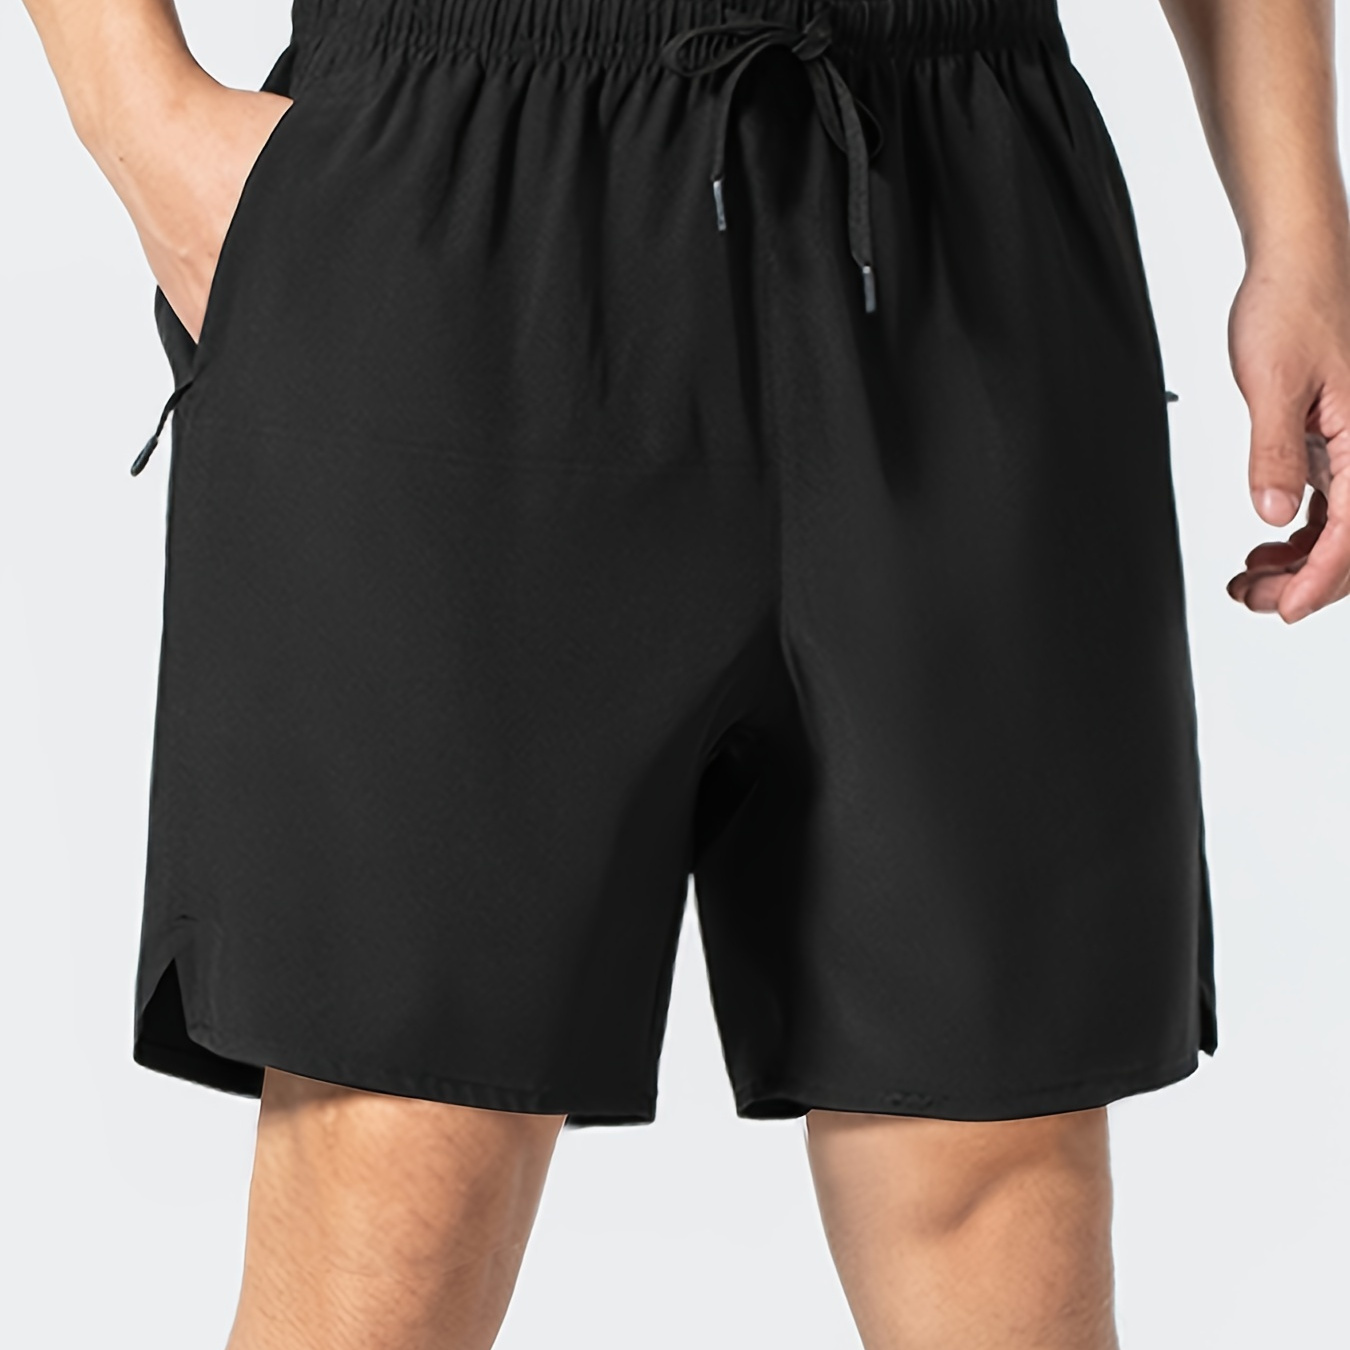 

Men's Solid Sports Shorts, Quick Dry And Lightweight Shorts With Drawstring And Zippered Pockets, Versatile For Summer Fitness Workout And Gym Wear